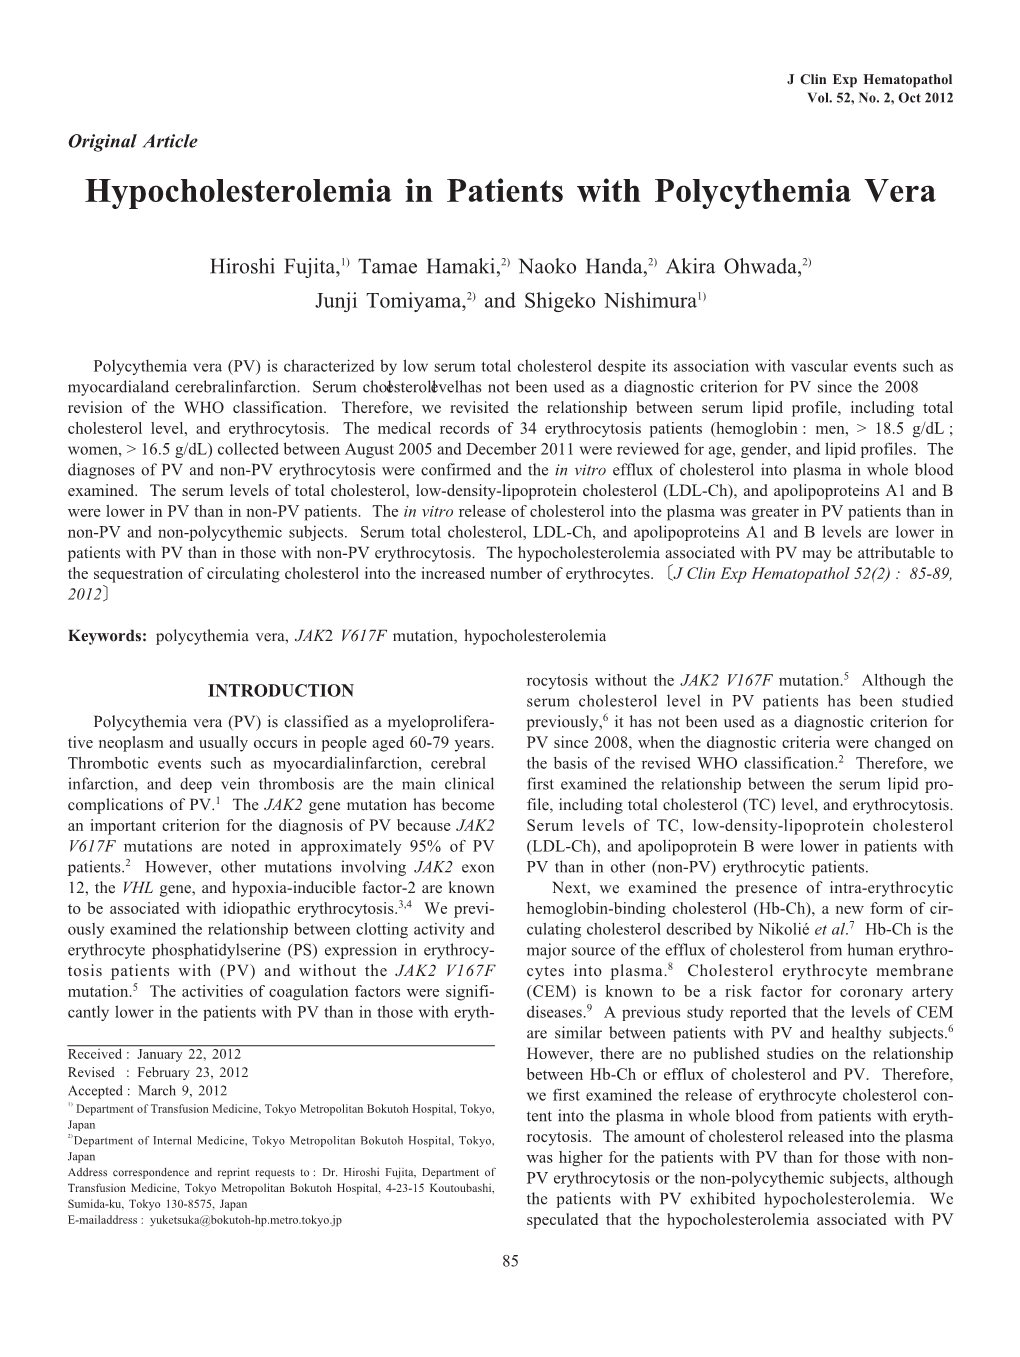 Hypocholesterolemia in Patients with Polycythemia Vera